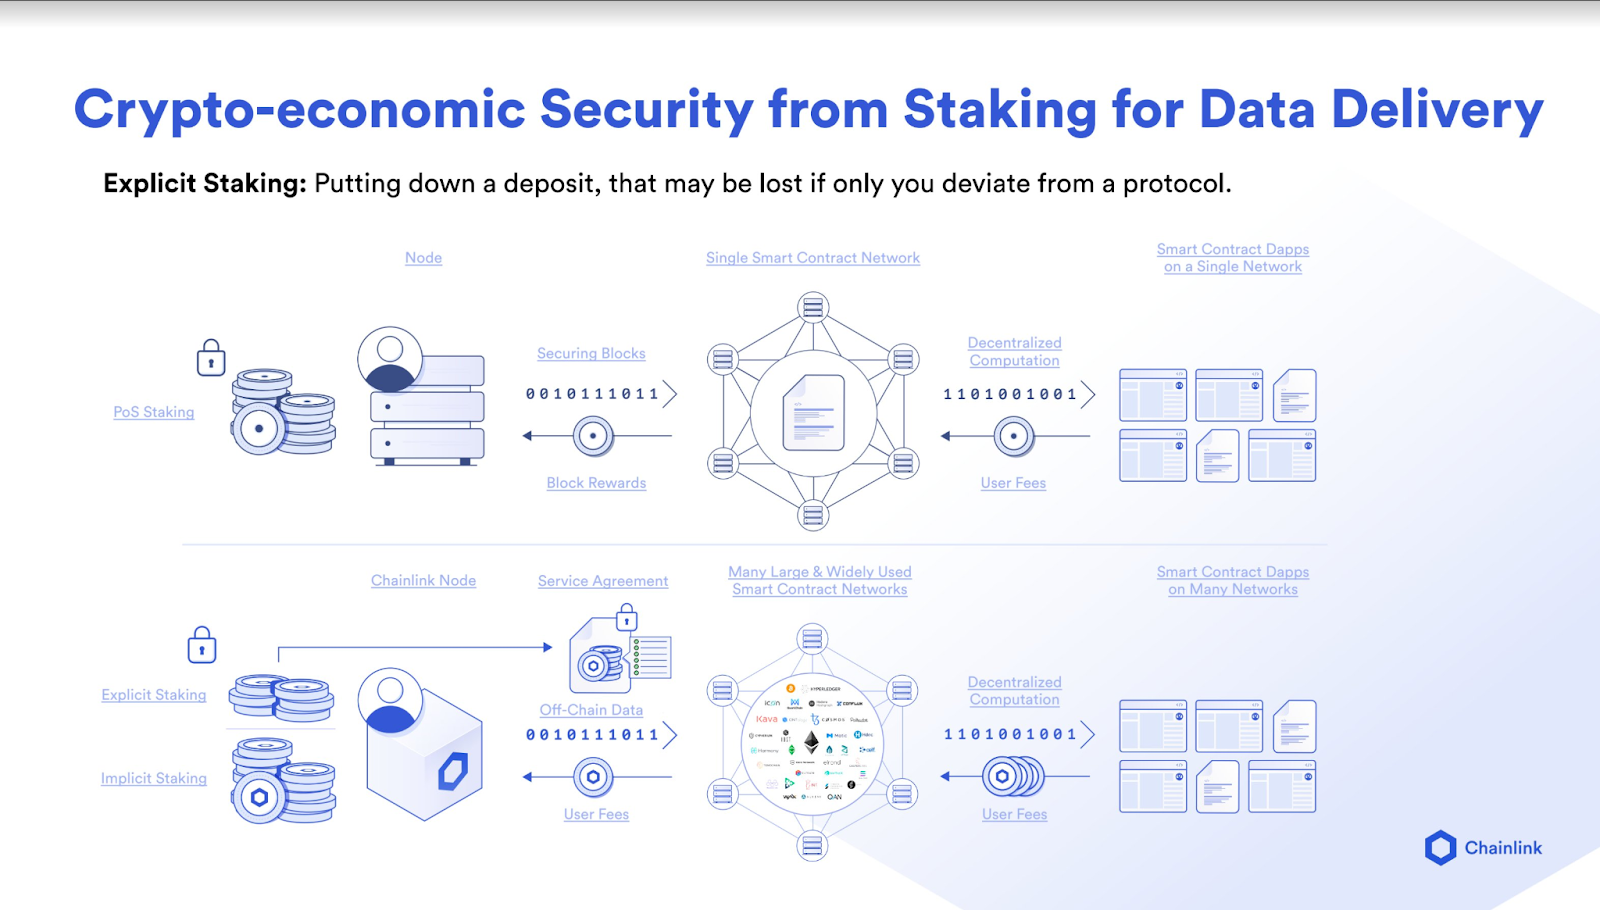 Chainlink Staking explained as we discover what Chainlink 2.0 entails.